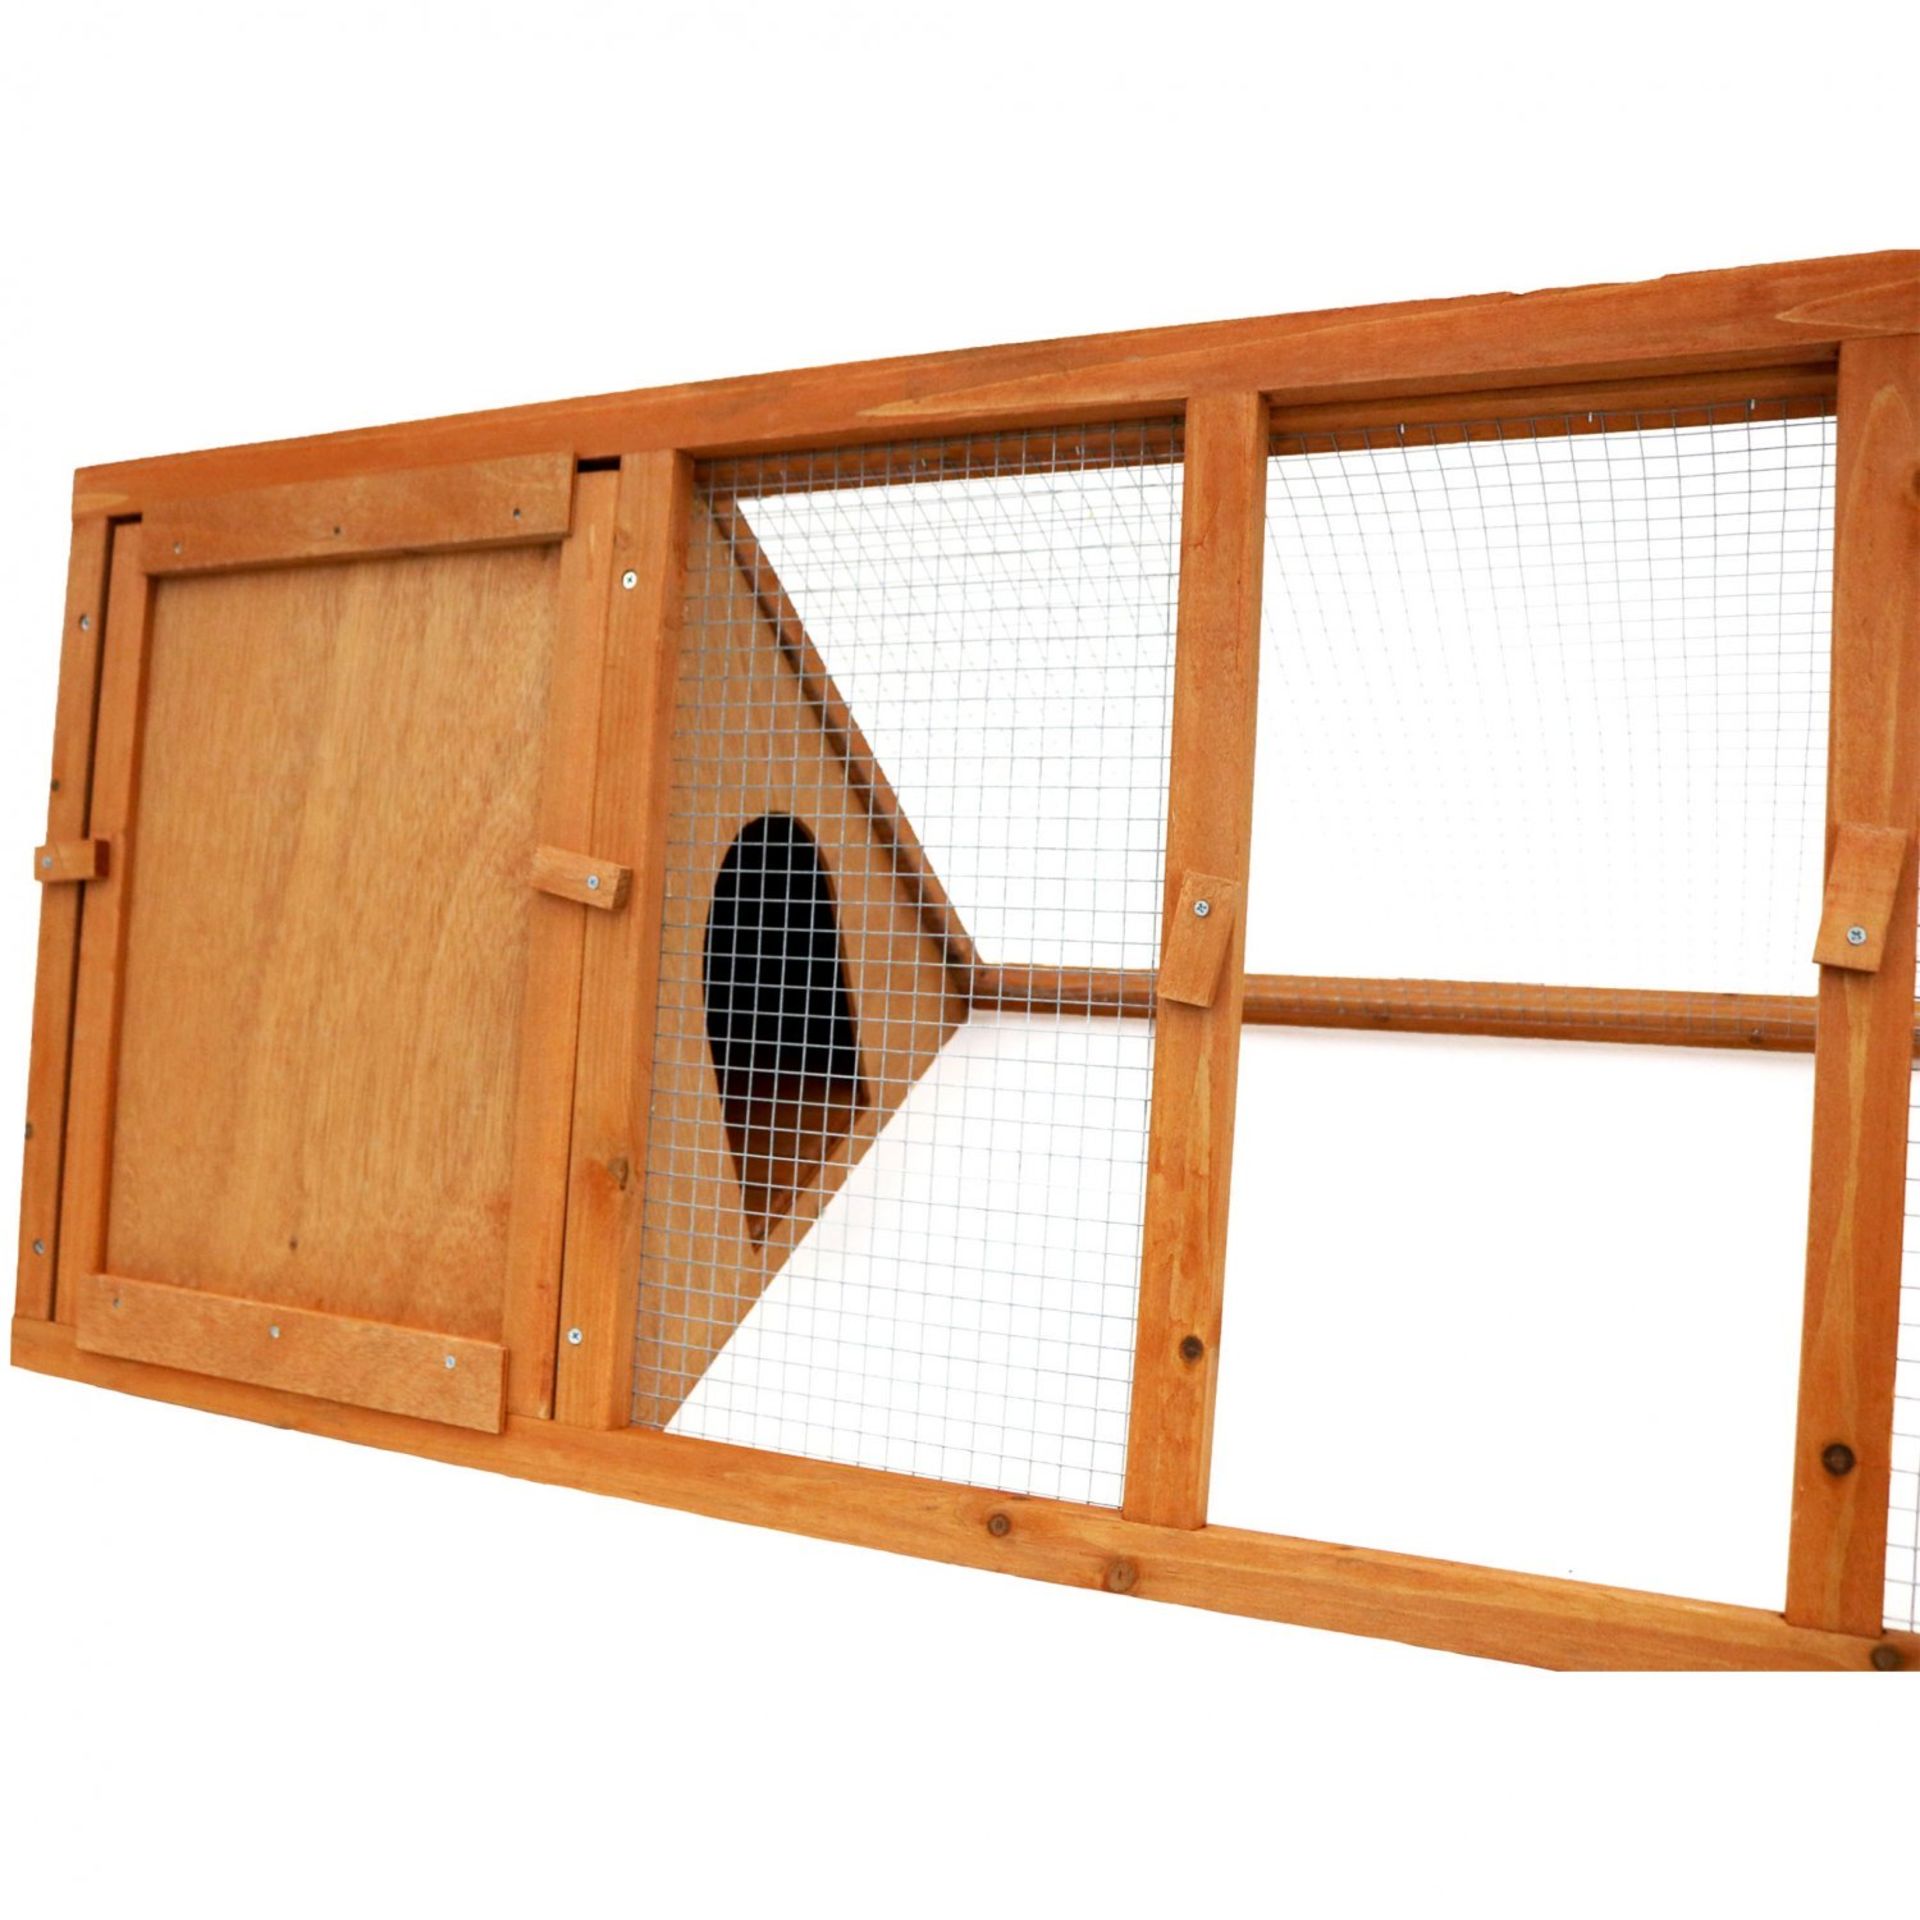 (TD107) Wooden Outdoor Triangle Rabbit Guinea Pig Pet Hutch Run Cage The triangle hutch is p... - Image 2 of 2